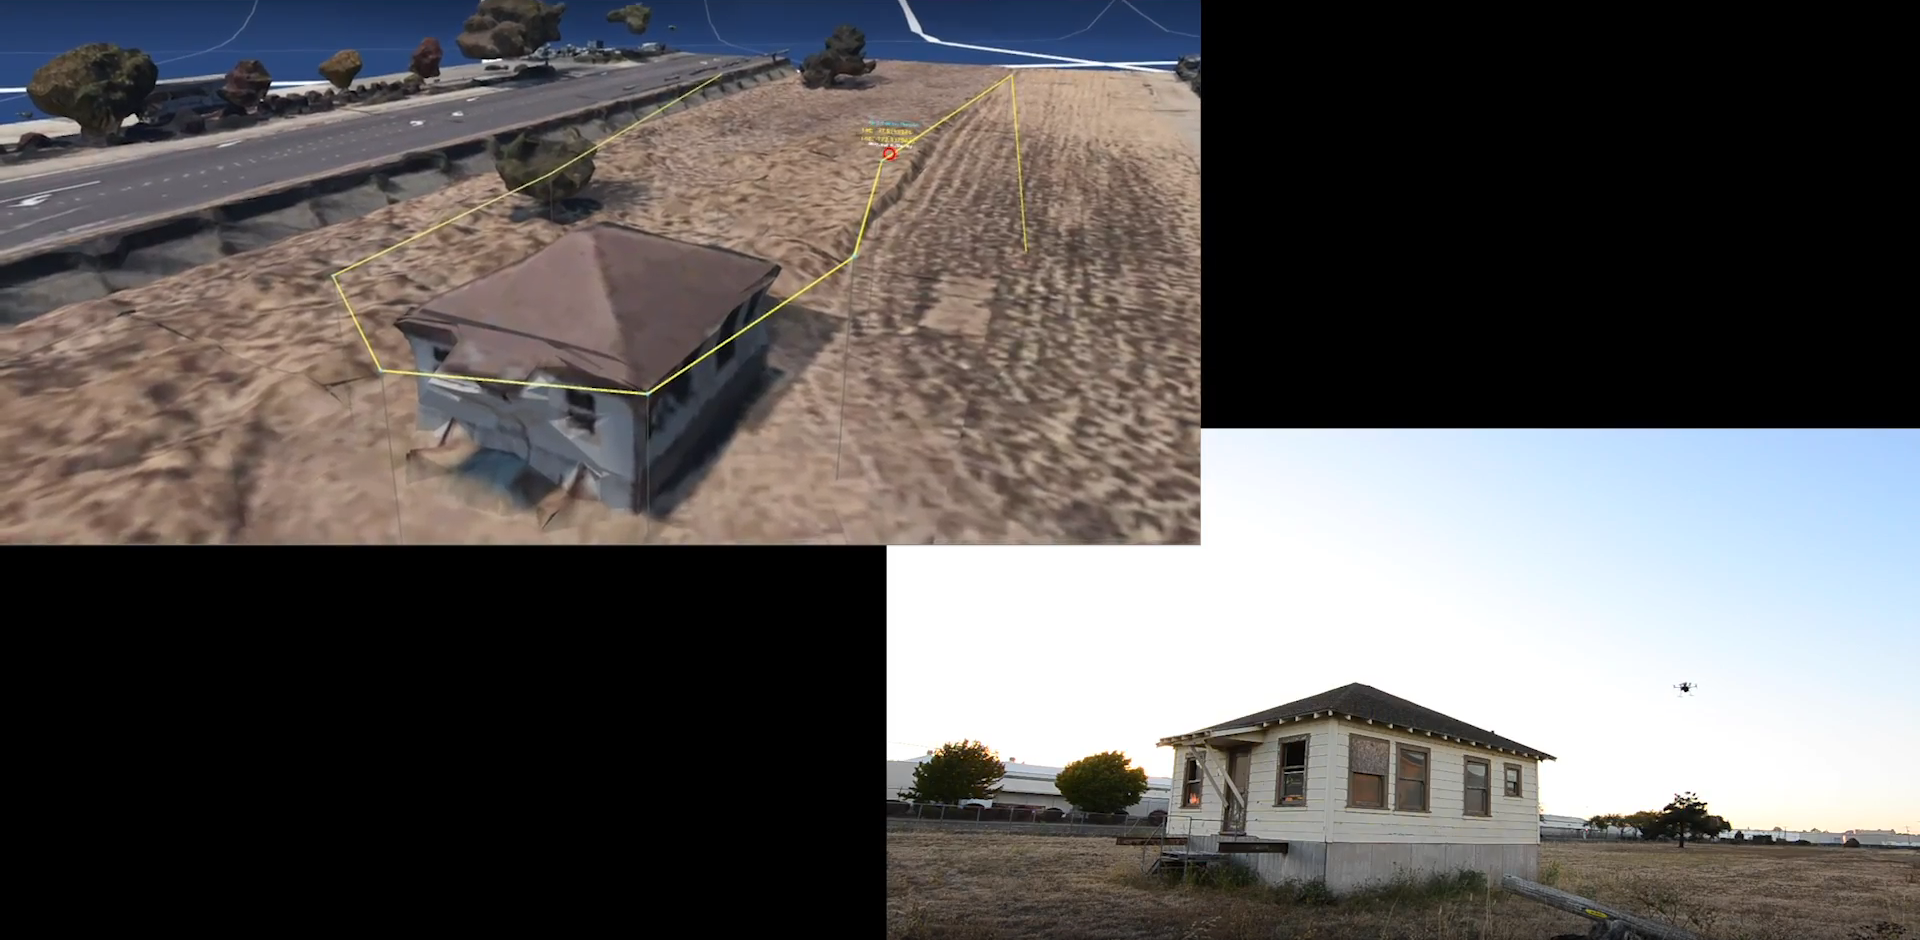 Side by side pictures. One showing drone flying near building and the other showing a virtual world denoting the real world with a virtual drone flying next to a virtual building